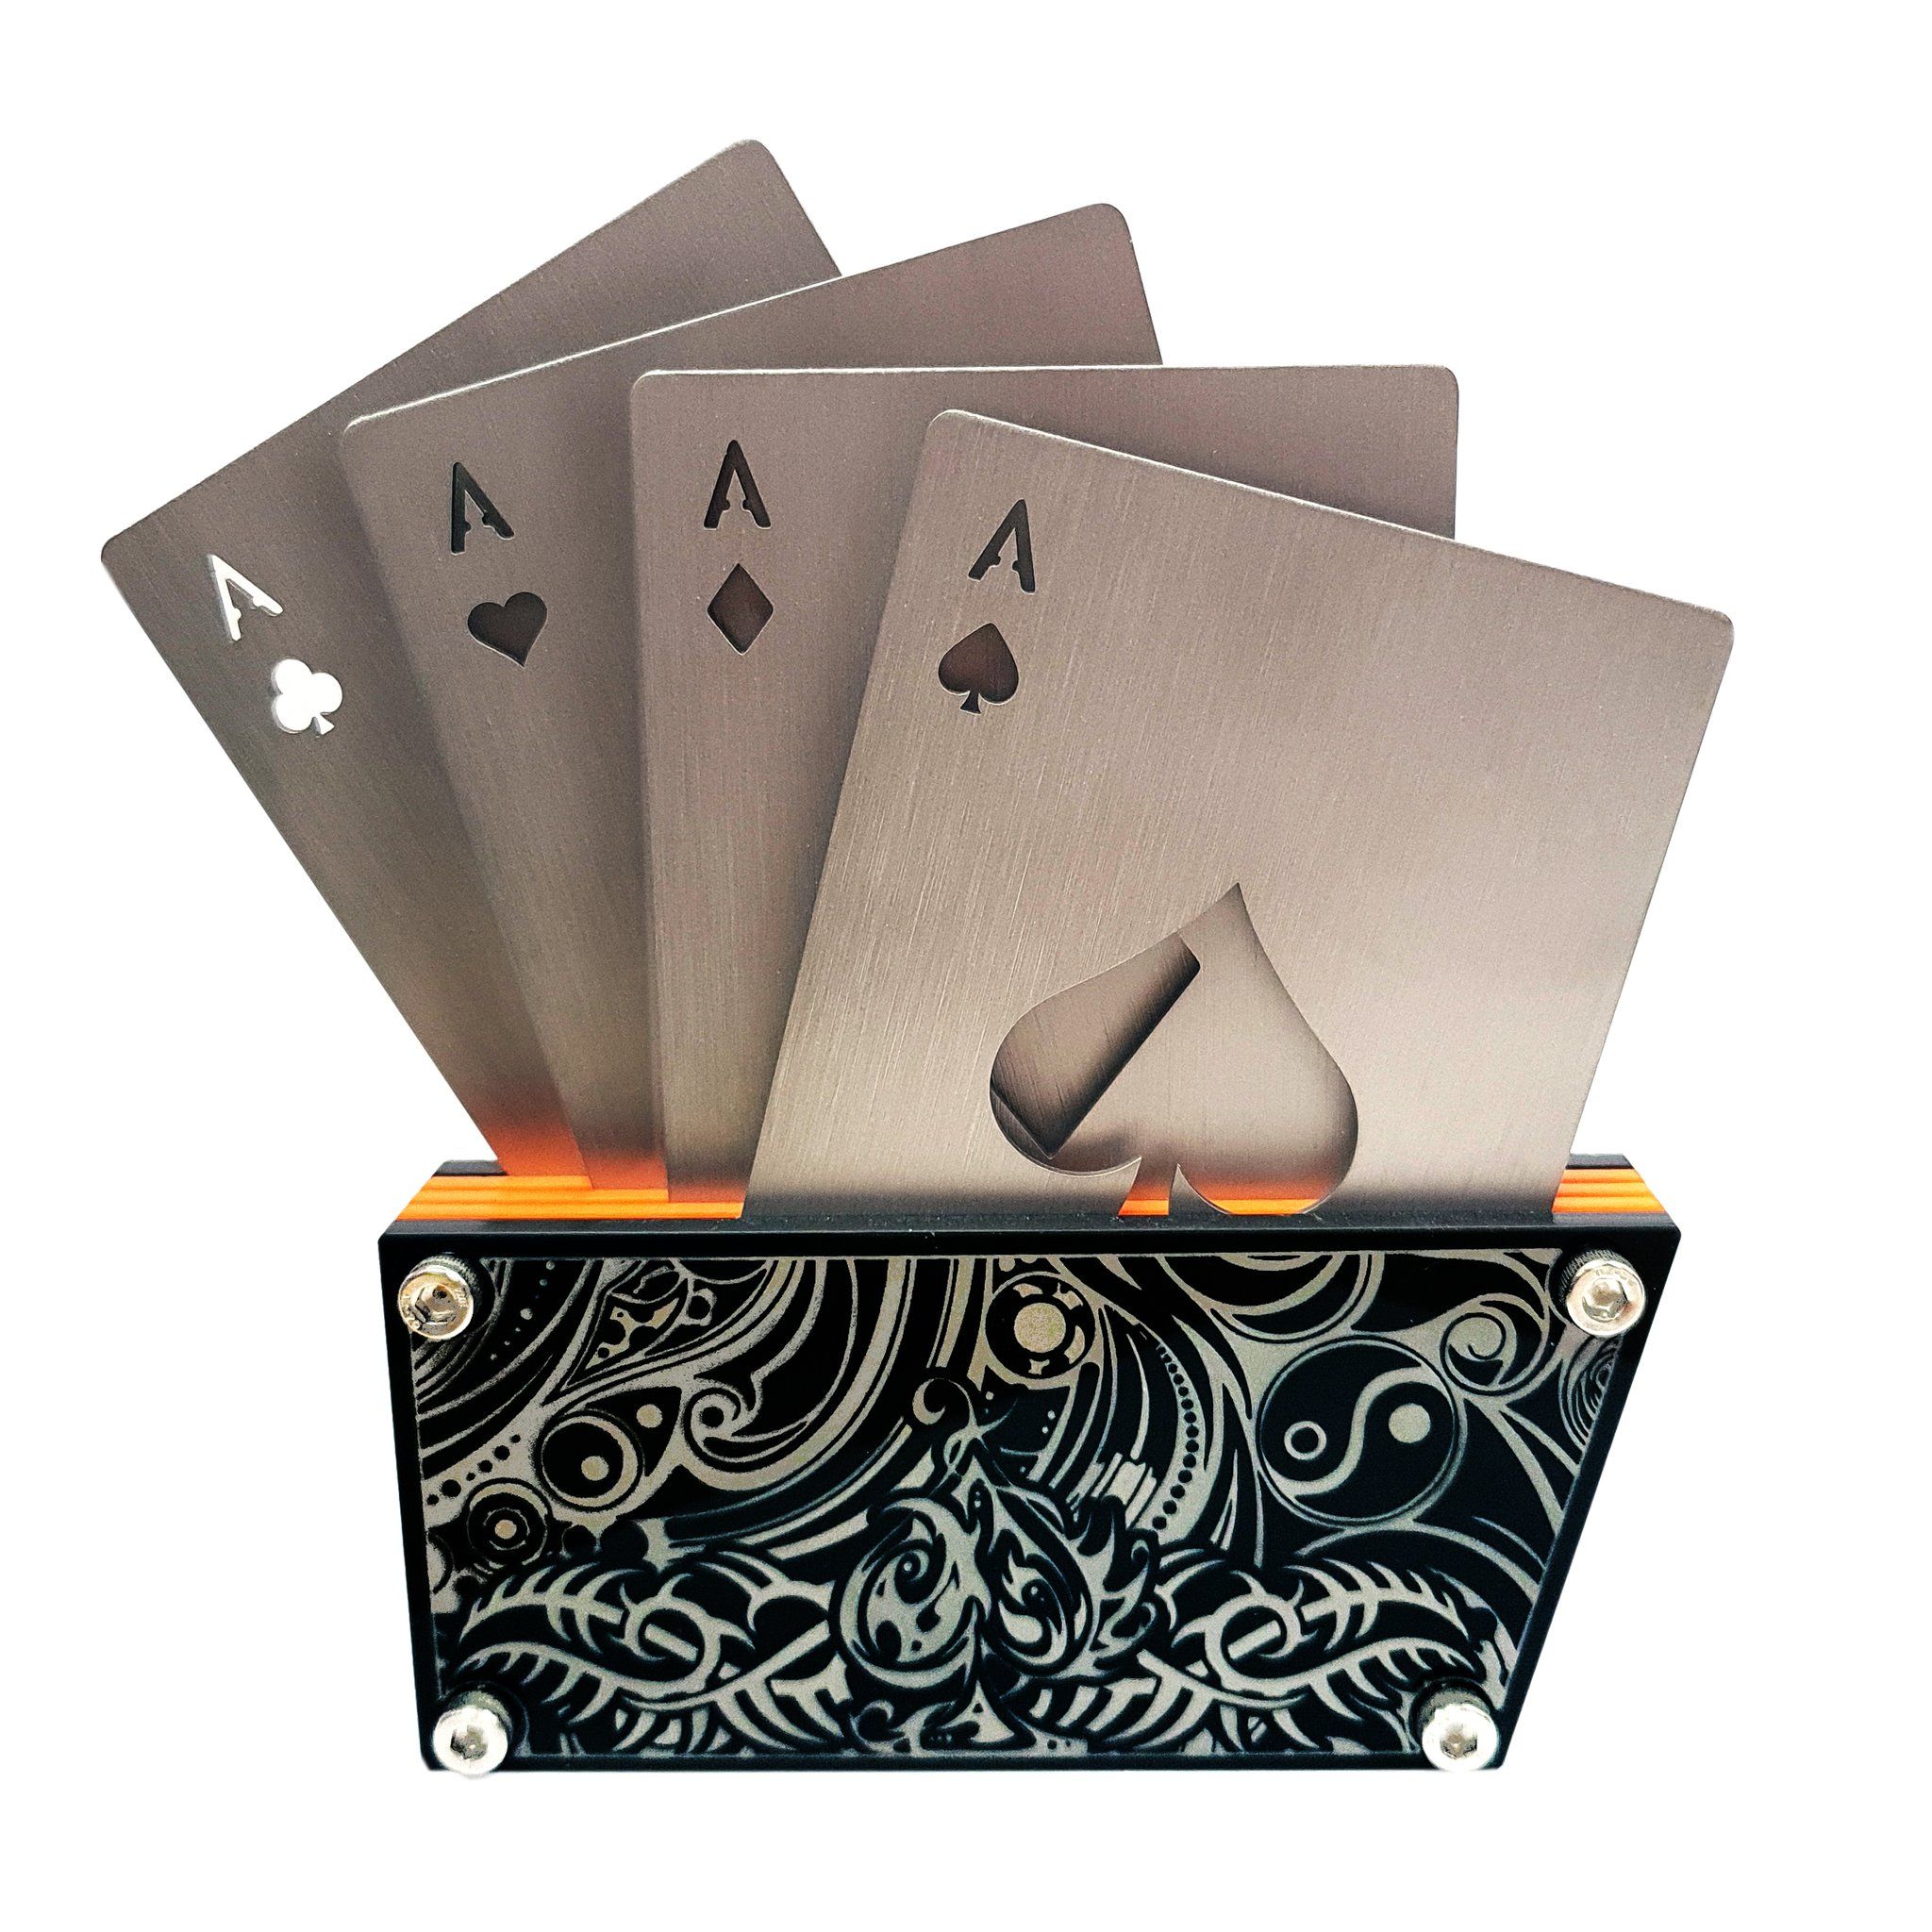 Stainless Steel Playing Cards Coaster & Bottle Opener Set of 4 with Base